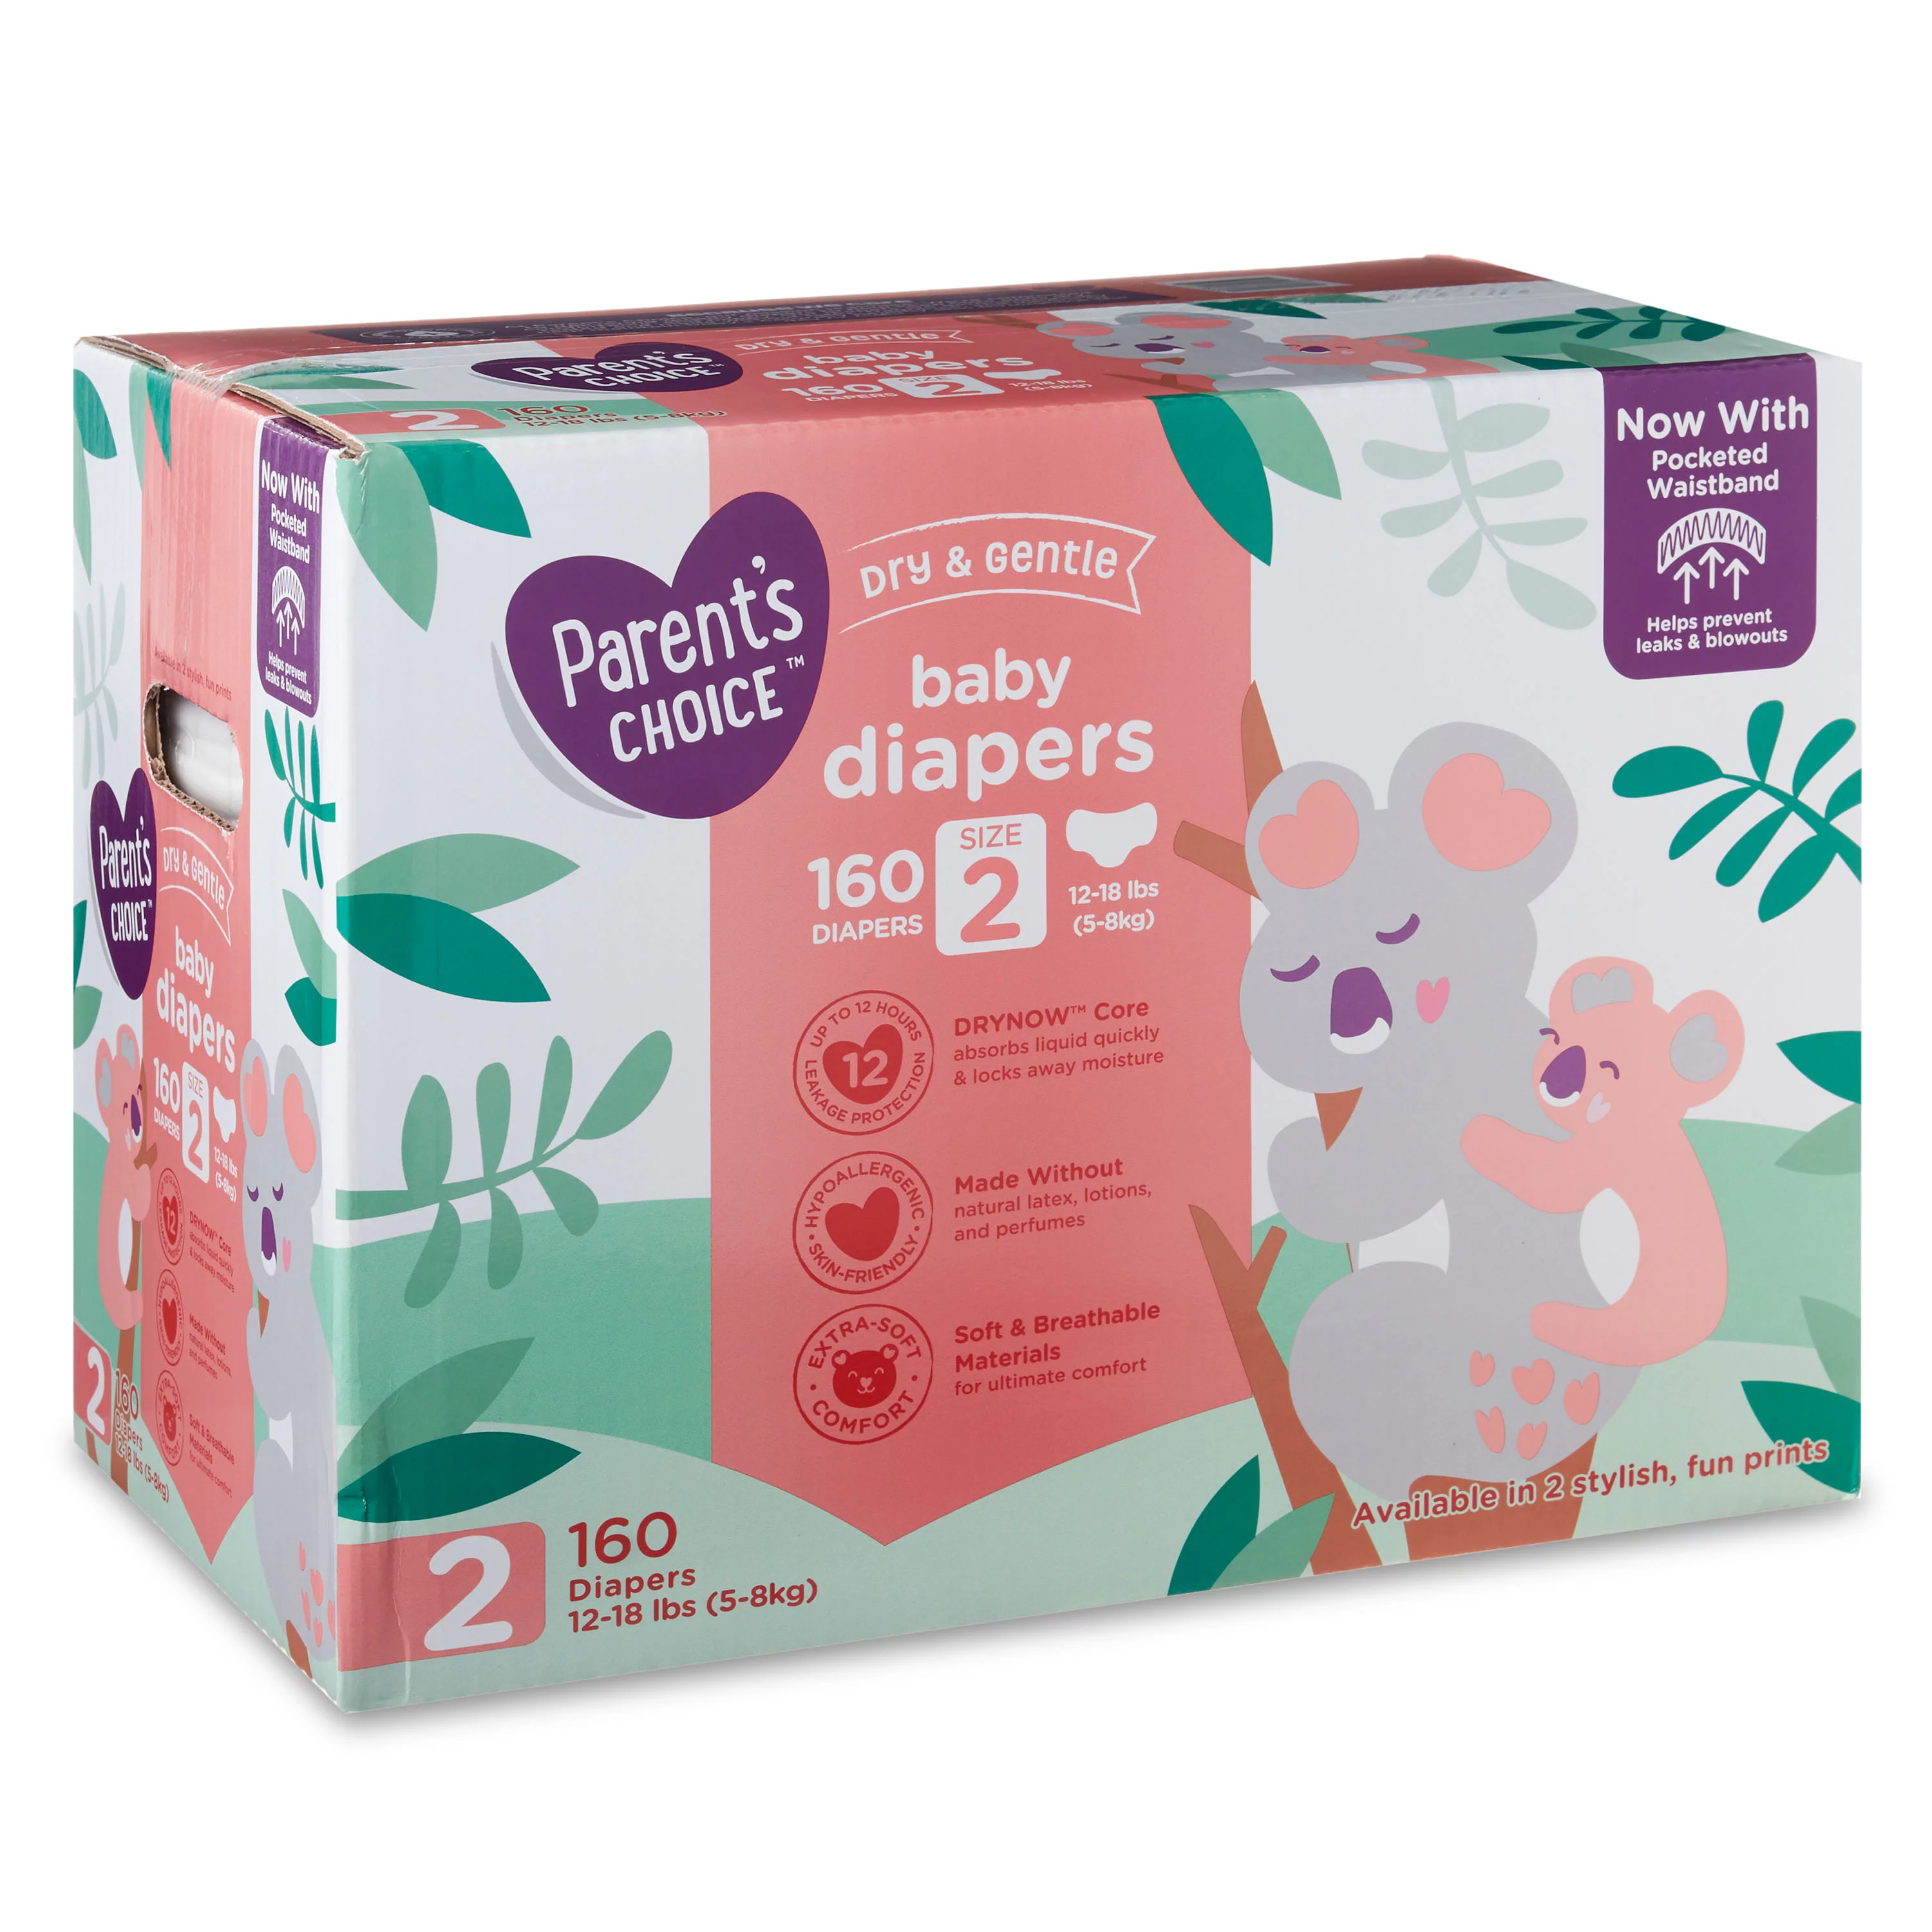 Parent's Choice Dry & Gentle Diapers 144 ct 2 - VIP Outlet